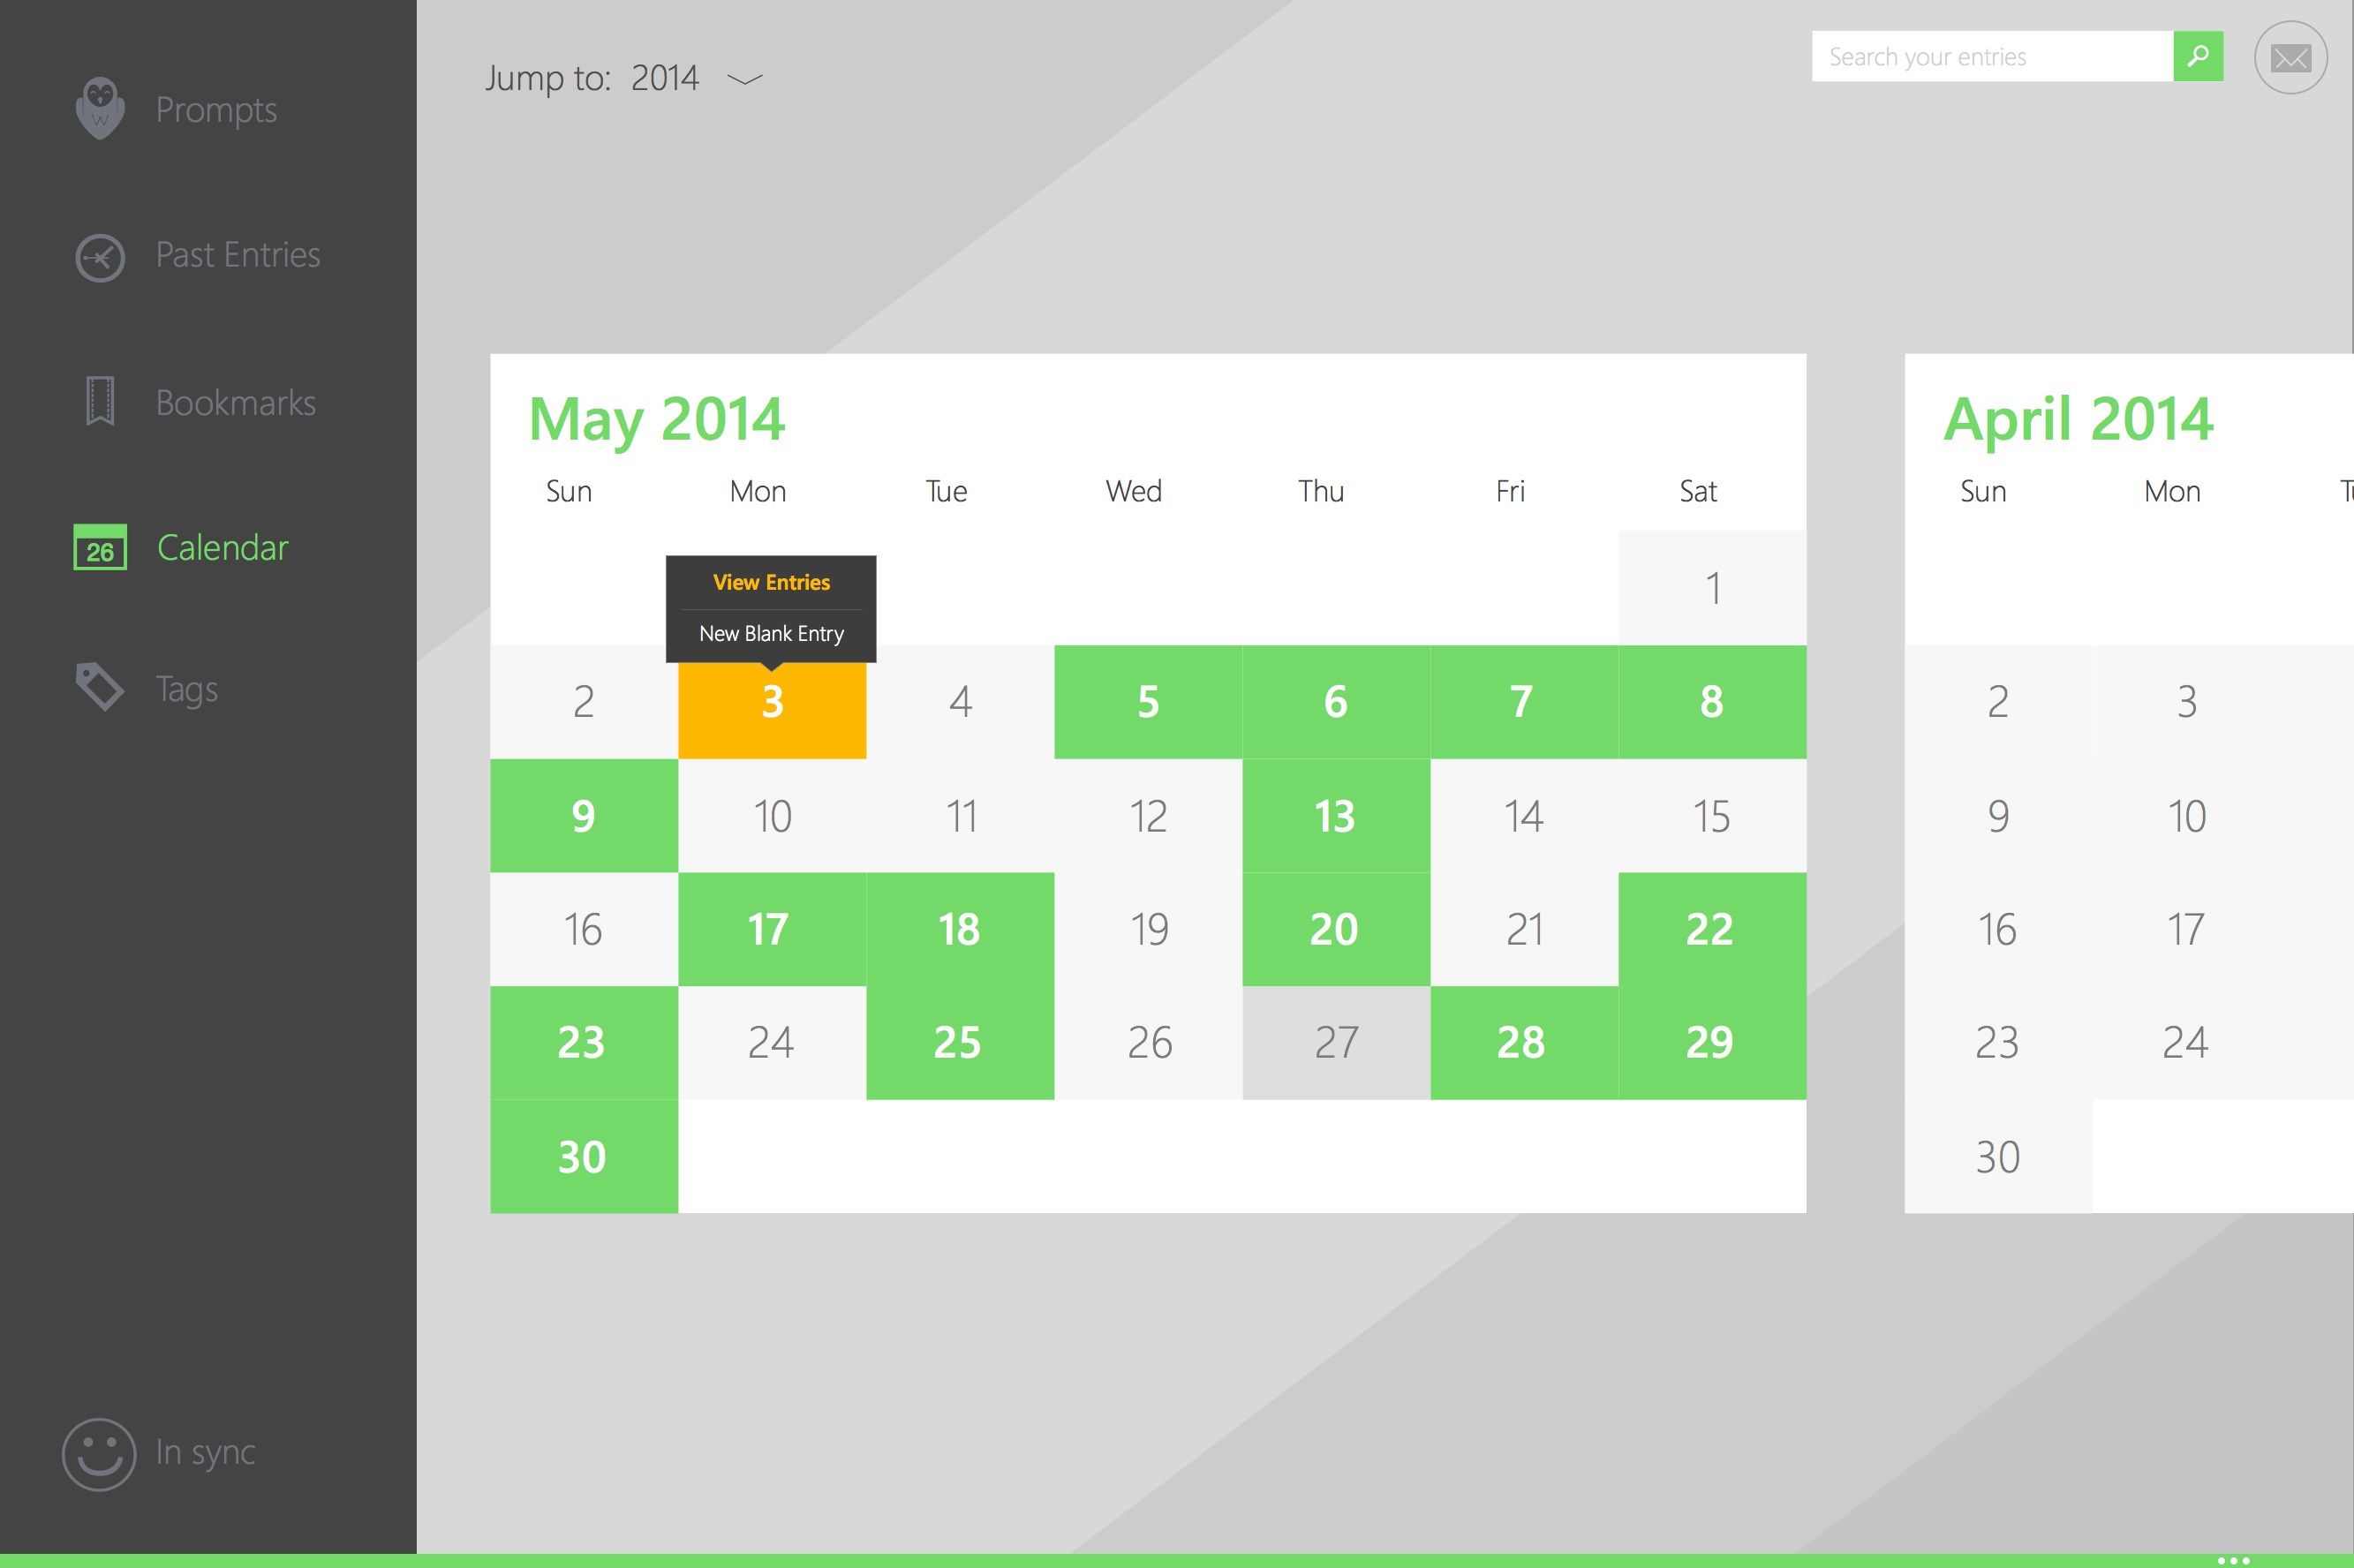 Calendar view of all your entries